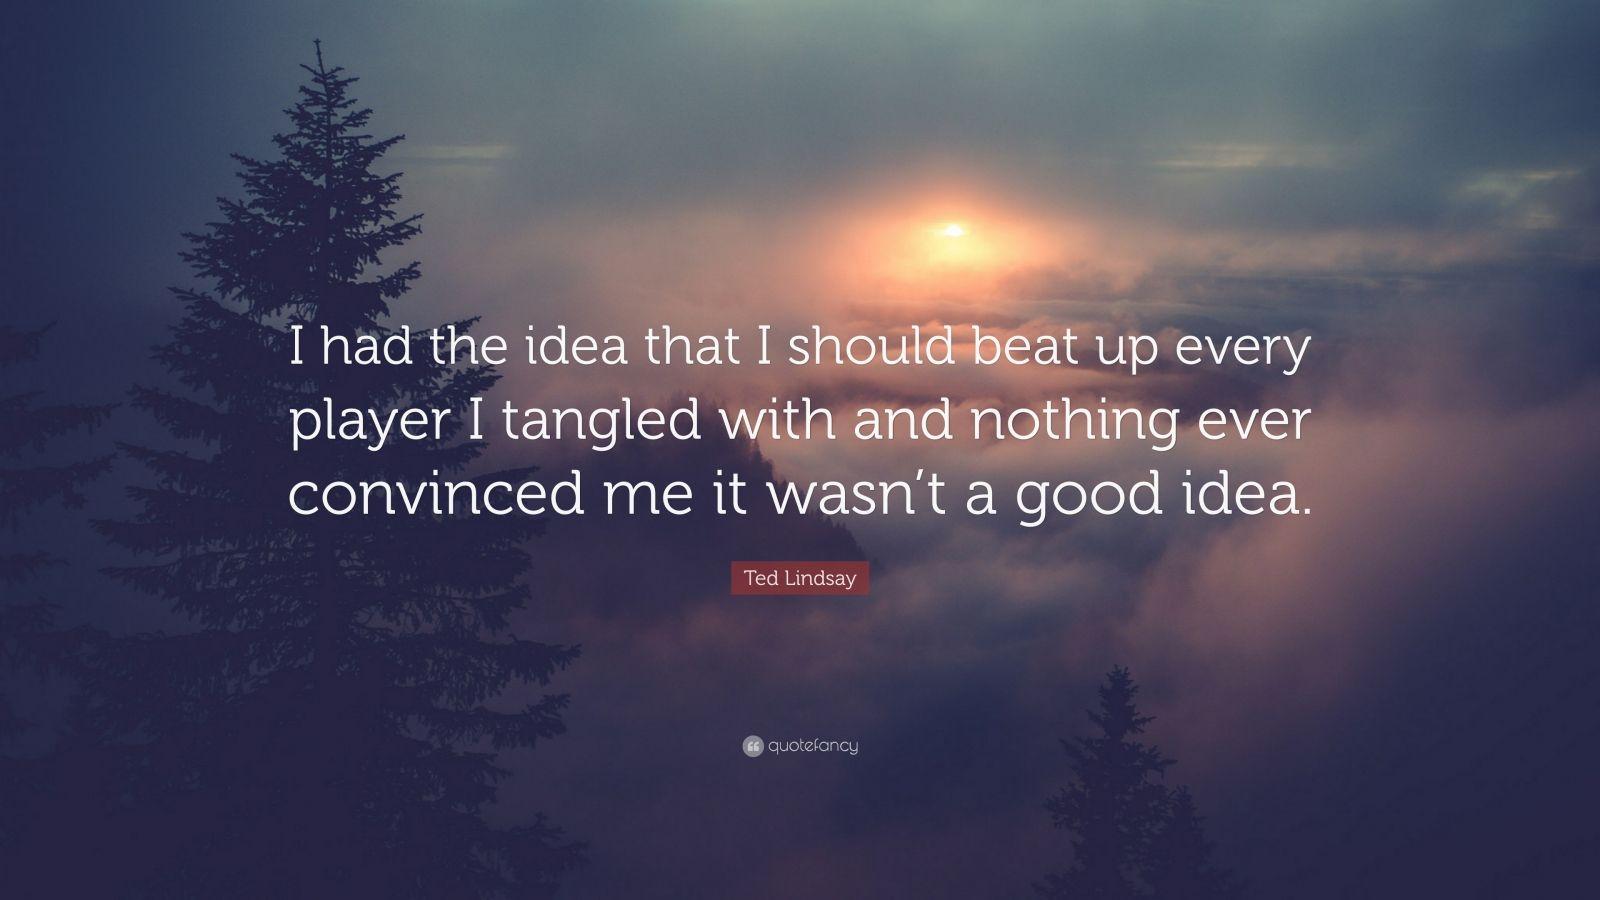 Ted Lindsay Quote: “I had the idea that I should beat up every